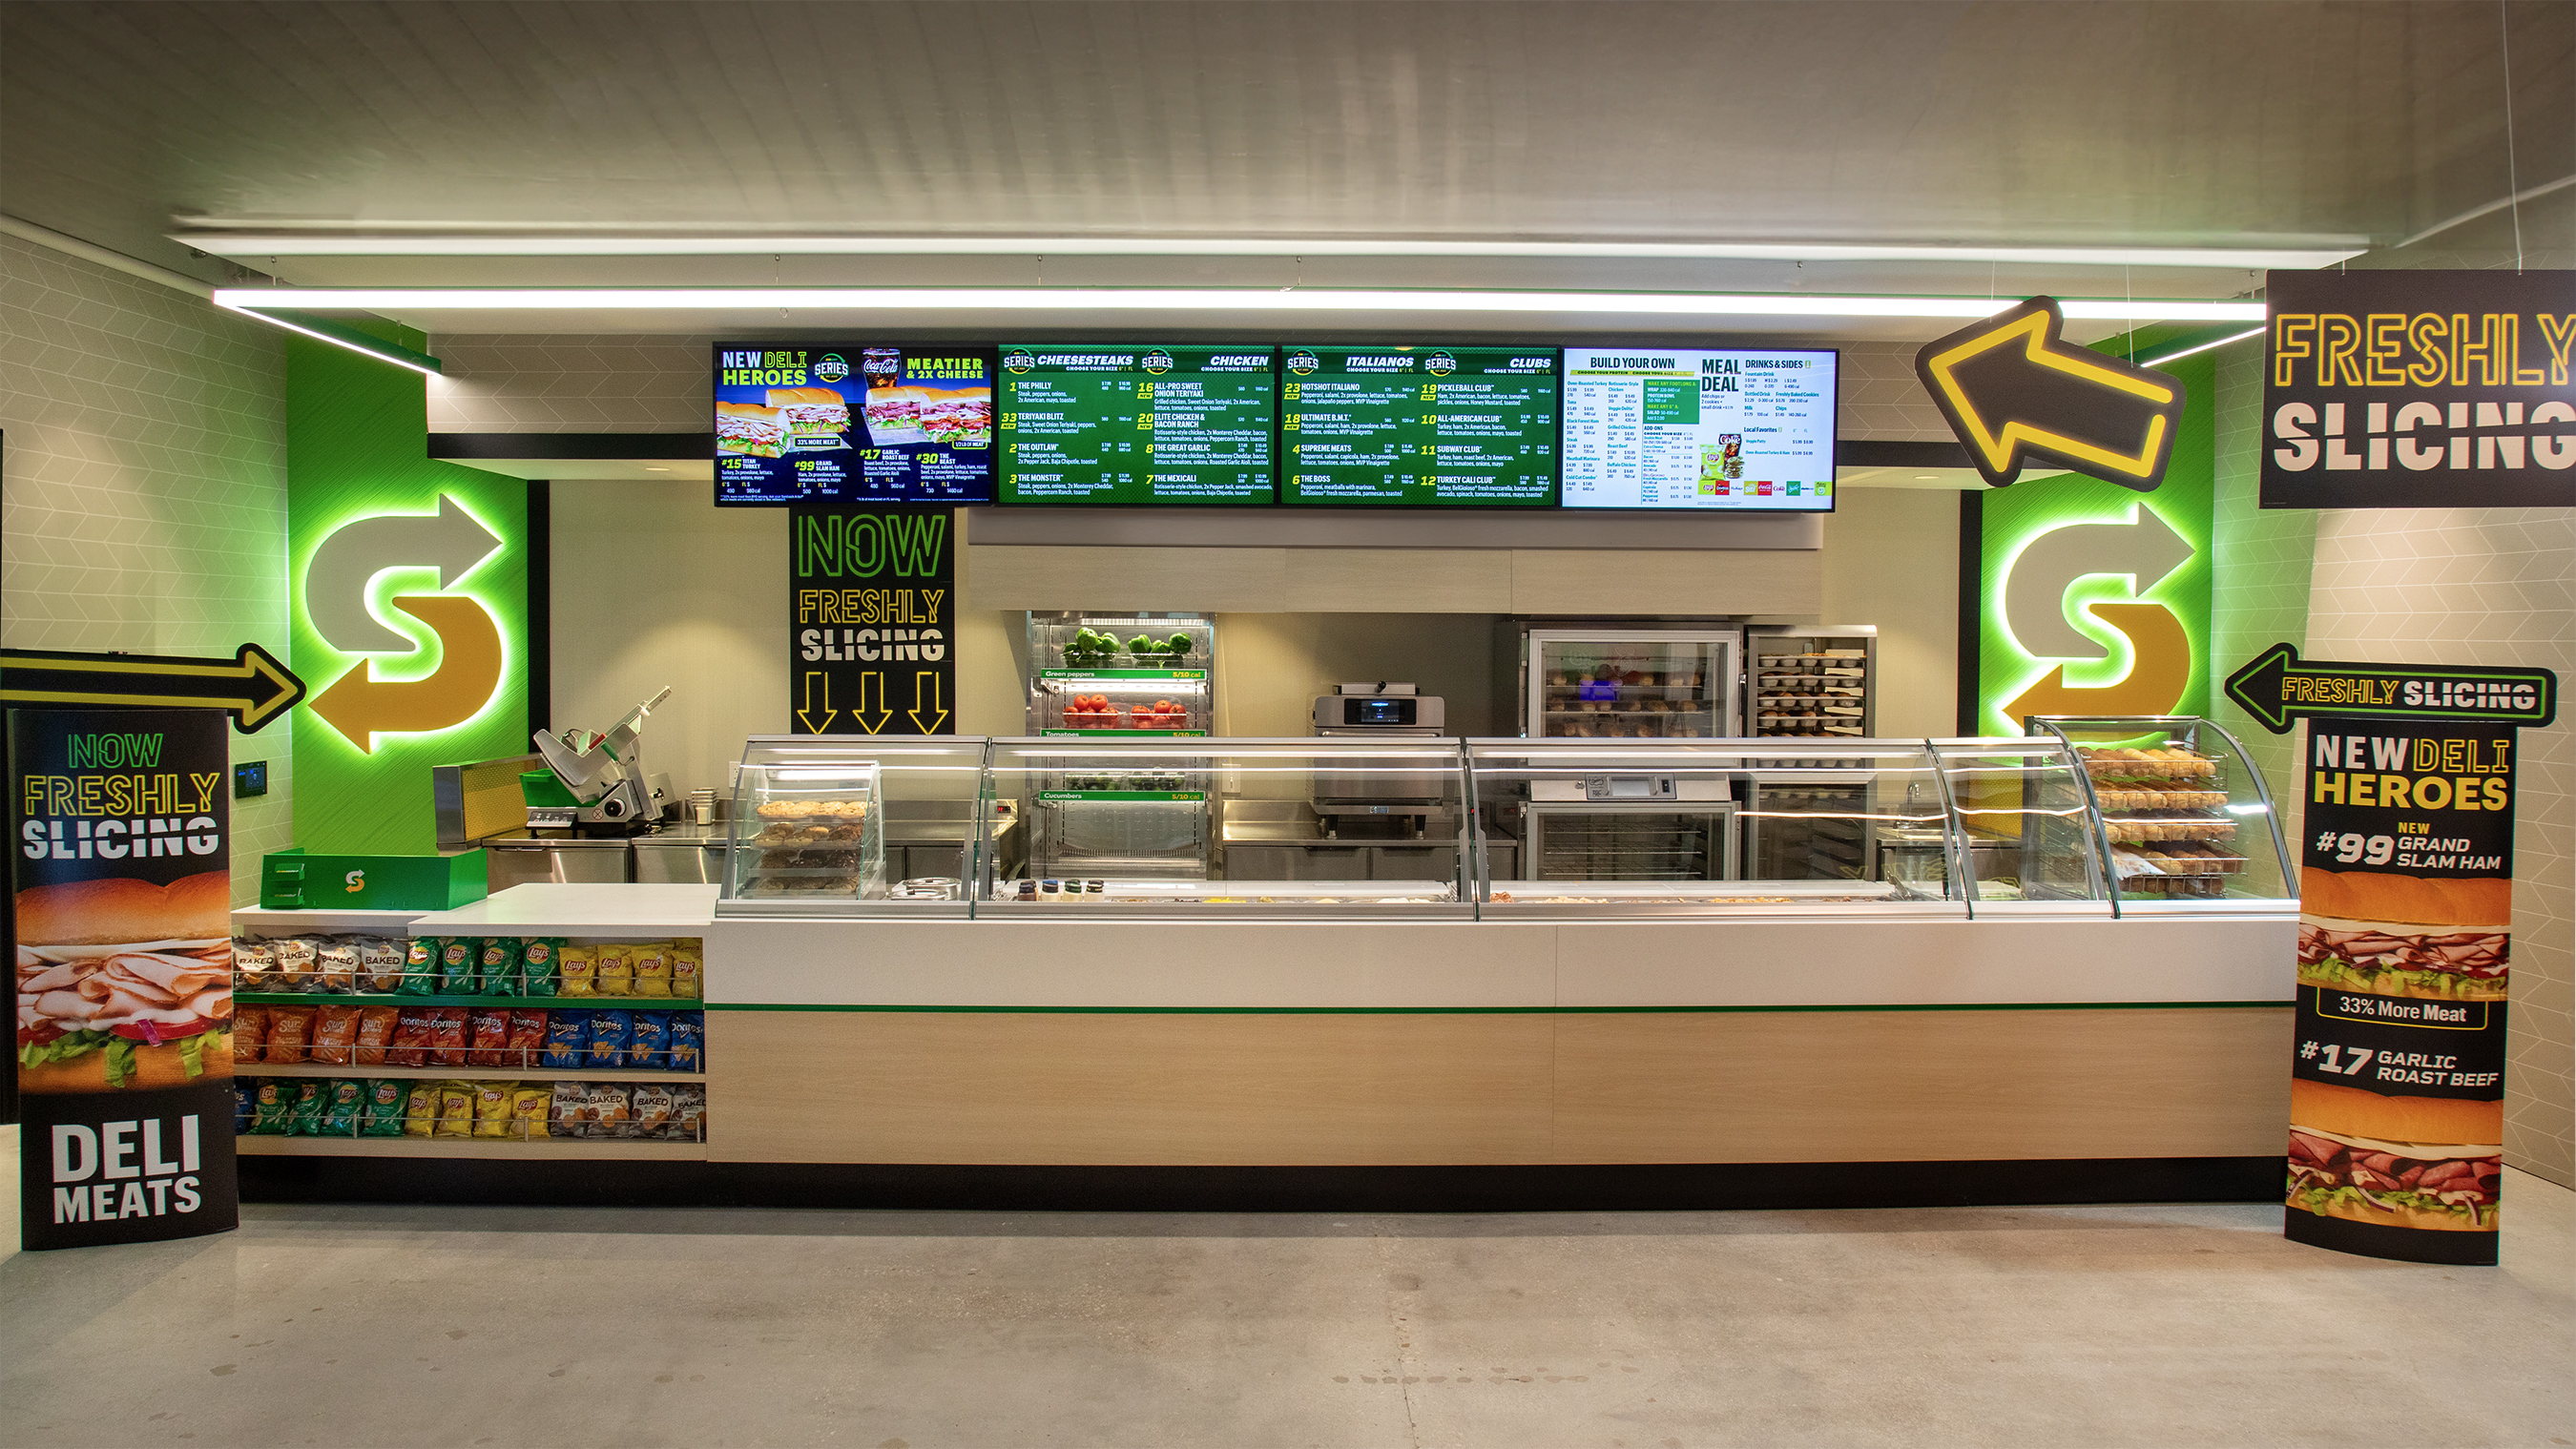 The arrival of freshly sliced meats is the latest change in Subway’s multi-year transformation journey to improve every aspect of the guest experience.